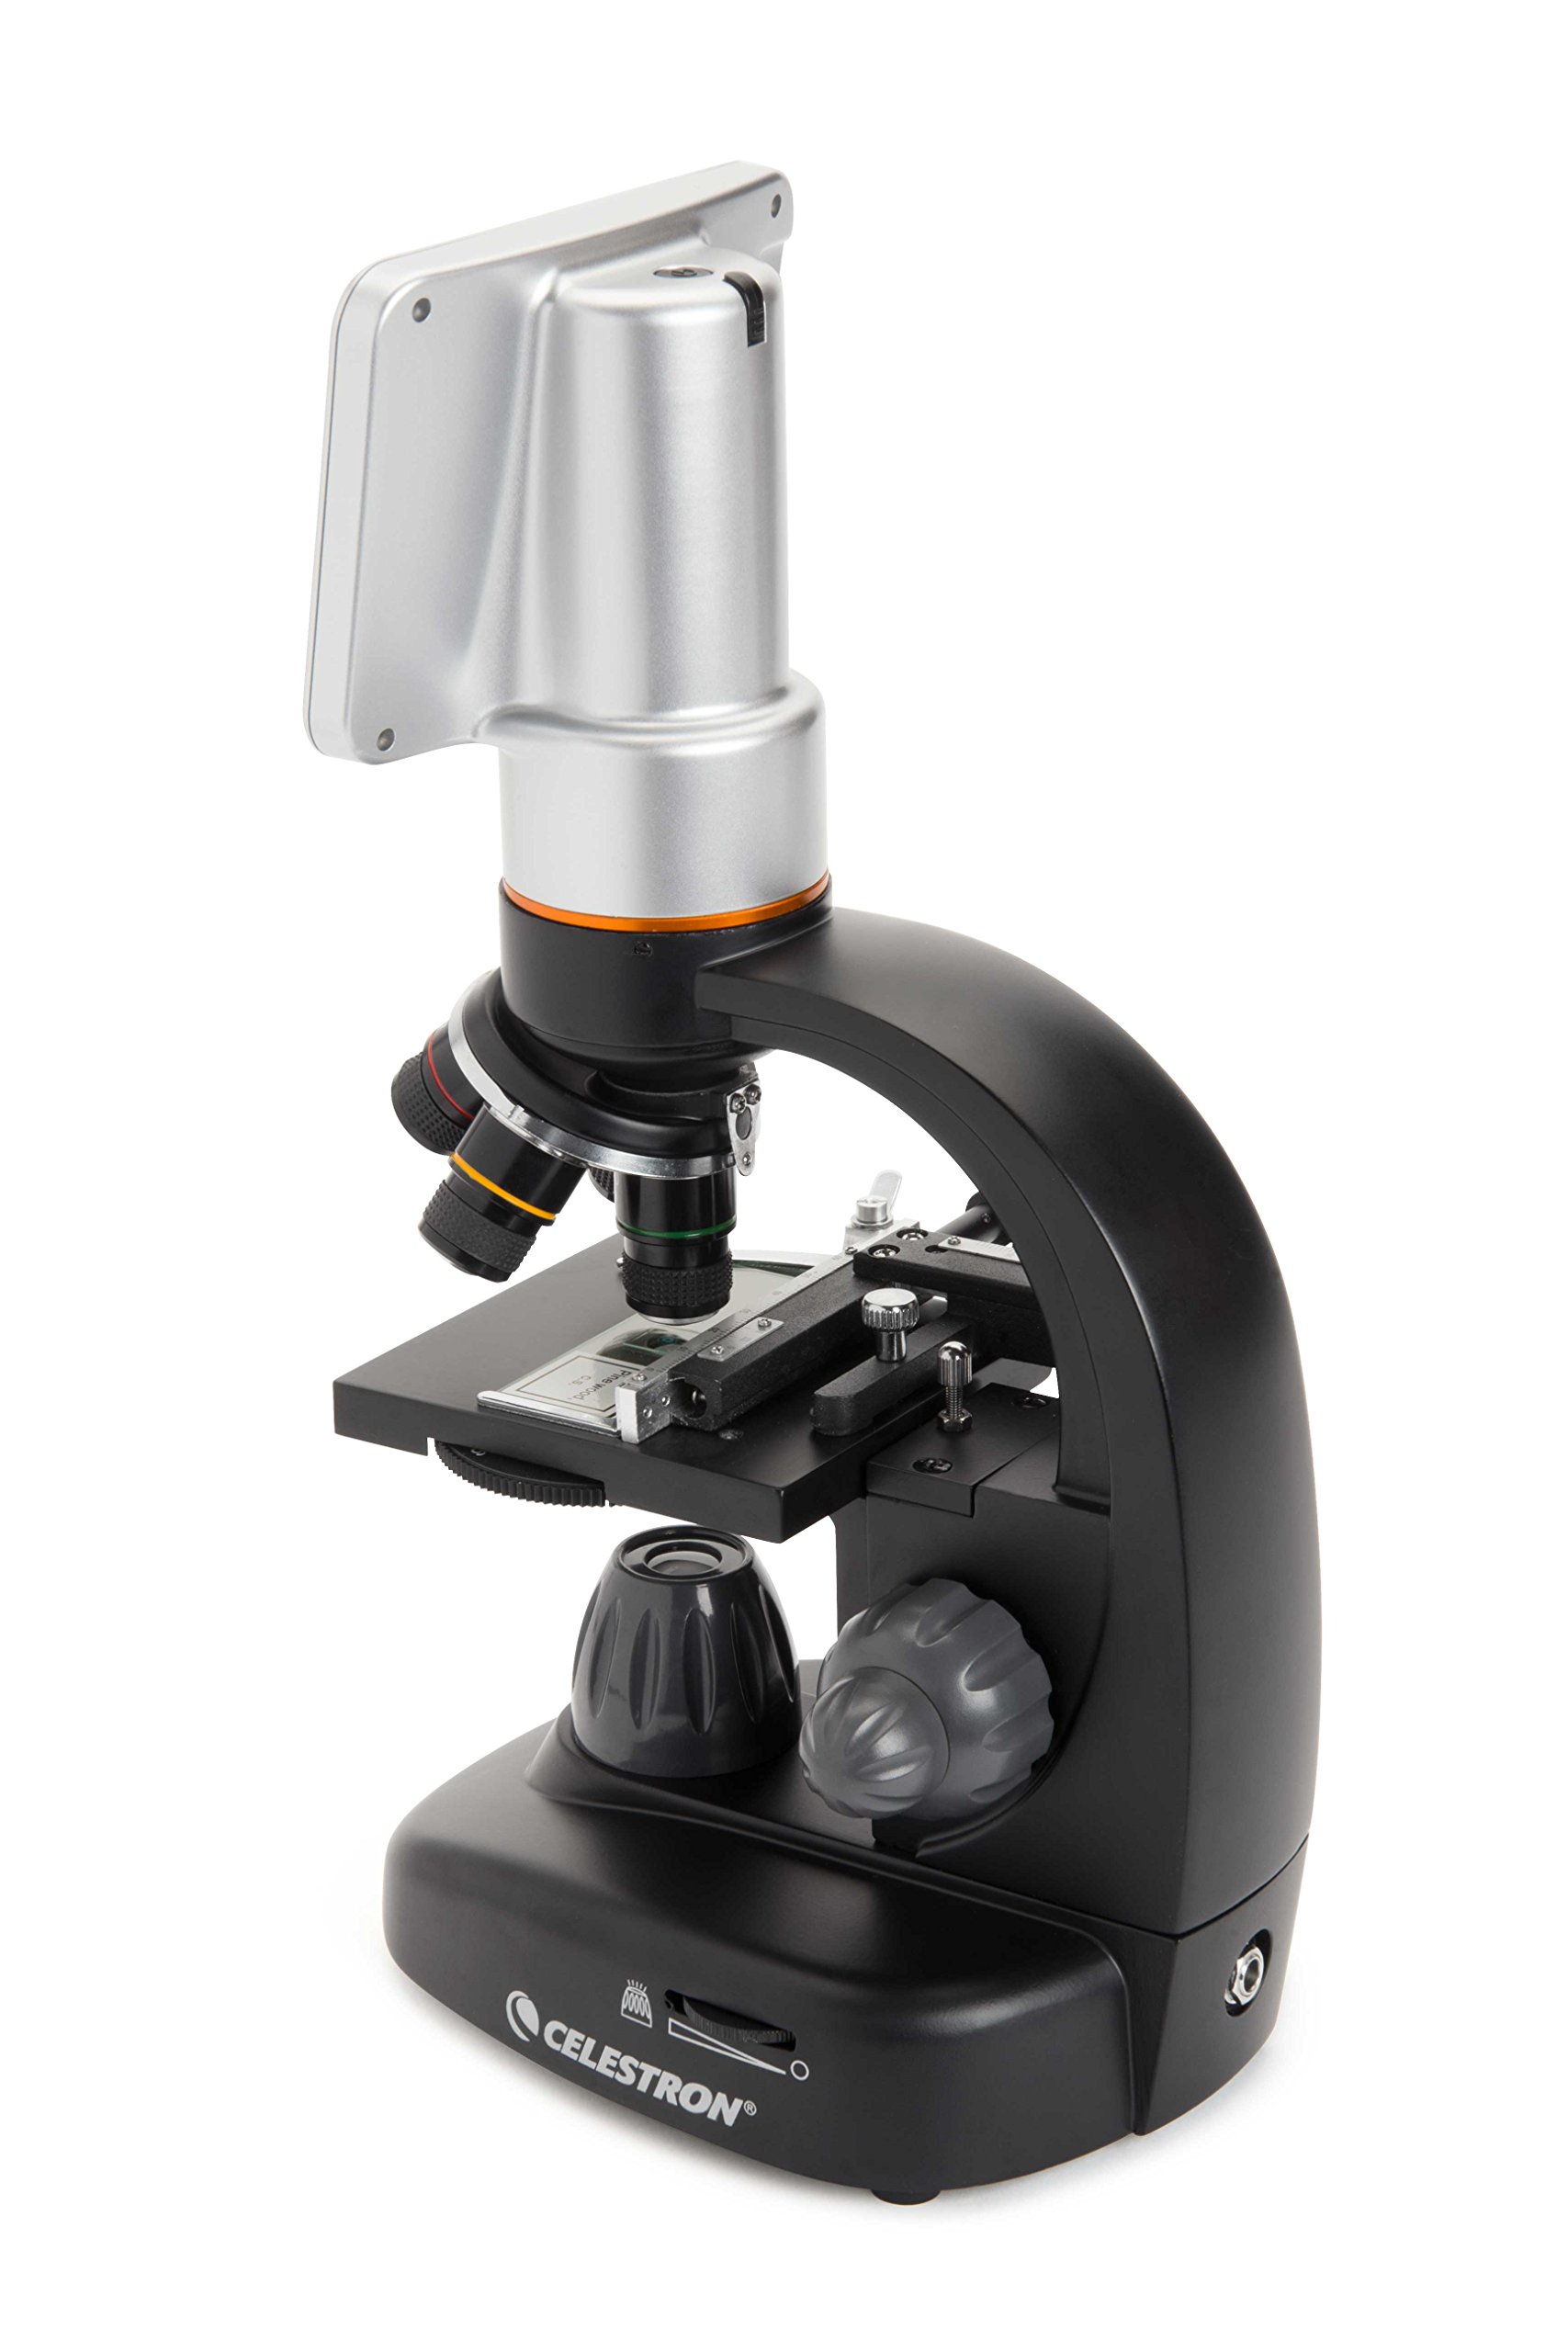 Celestron - TetraView LCD Digital Microscope - Biological Microscope with a Built-In 5MP Digital Camera - Adjustable Mechanical 